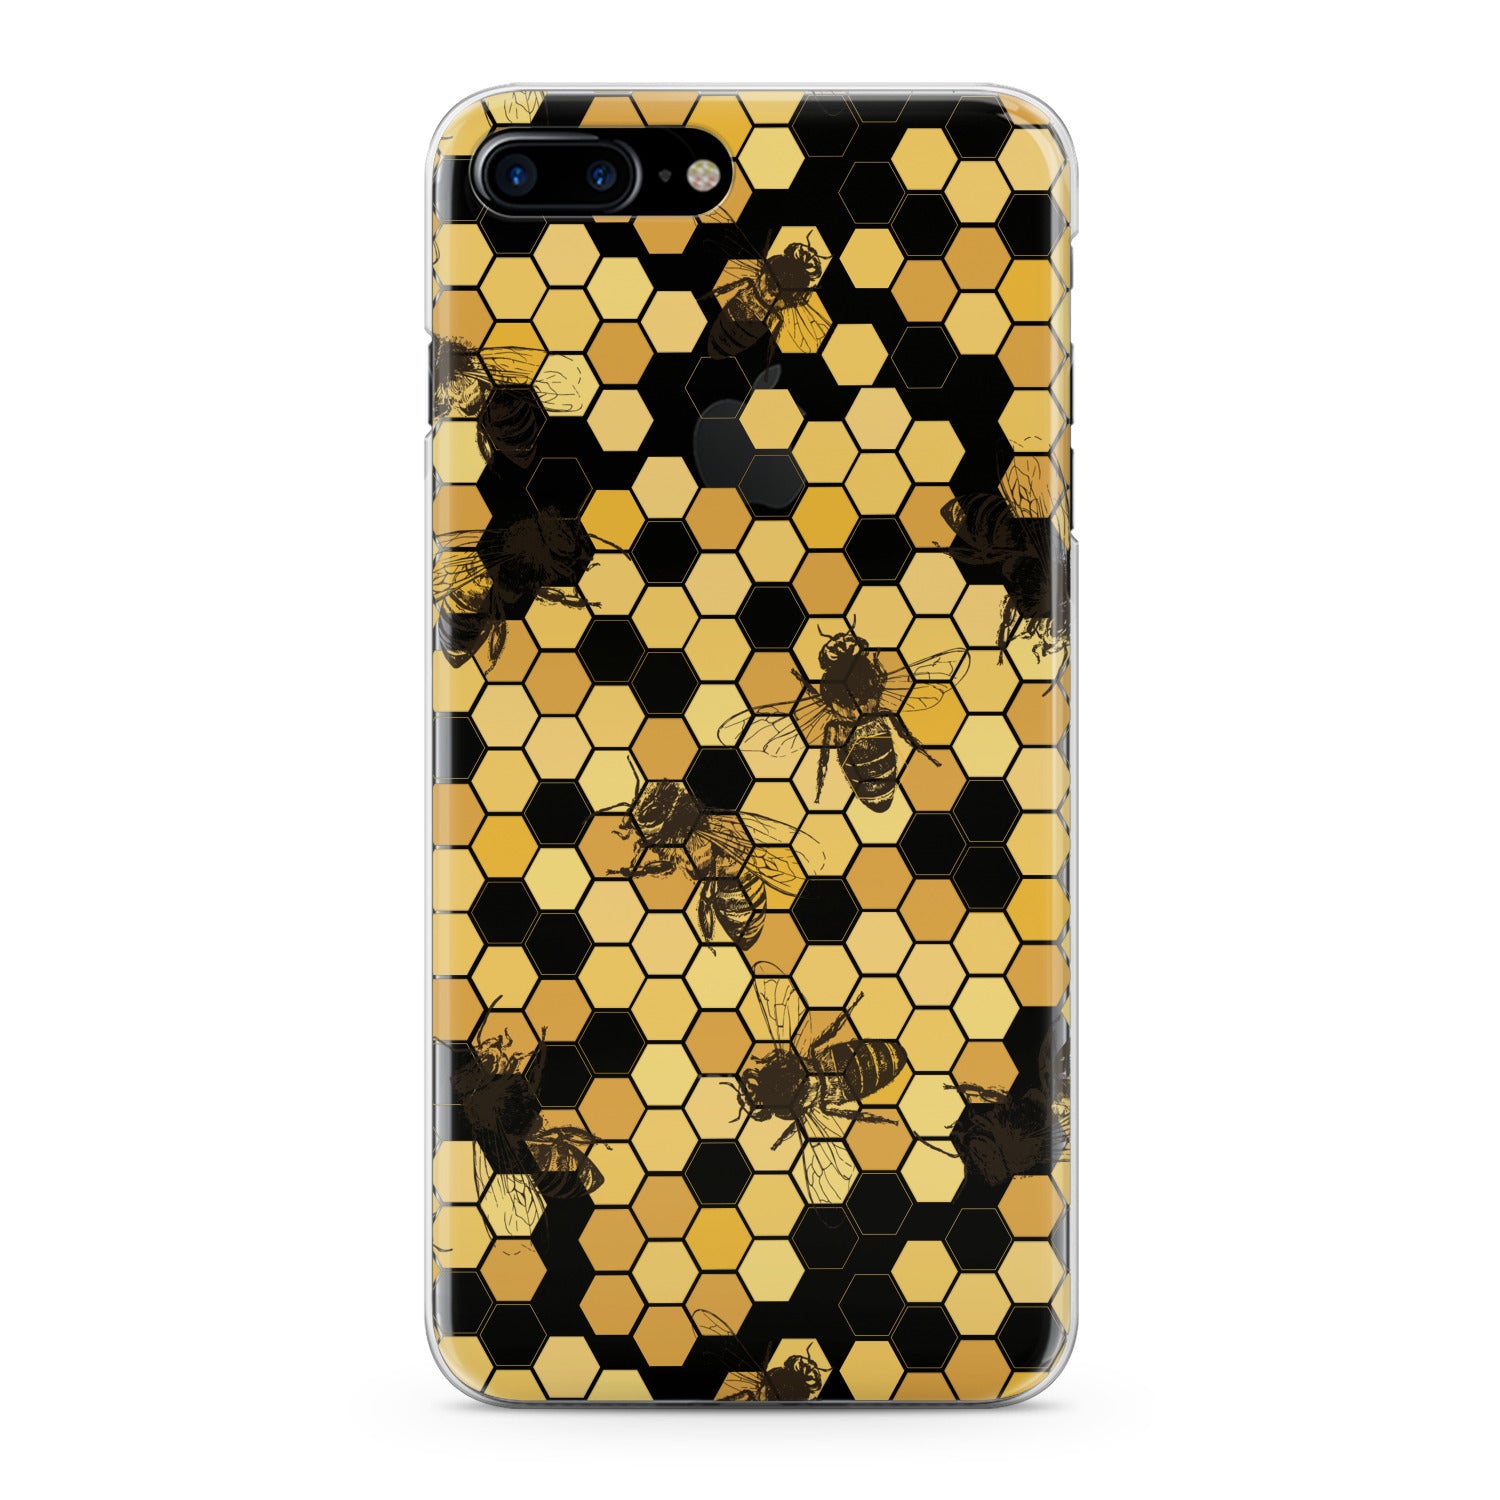 Lex Altern Realistic Bees Phone Case for your iPhone & Android phone.